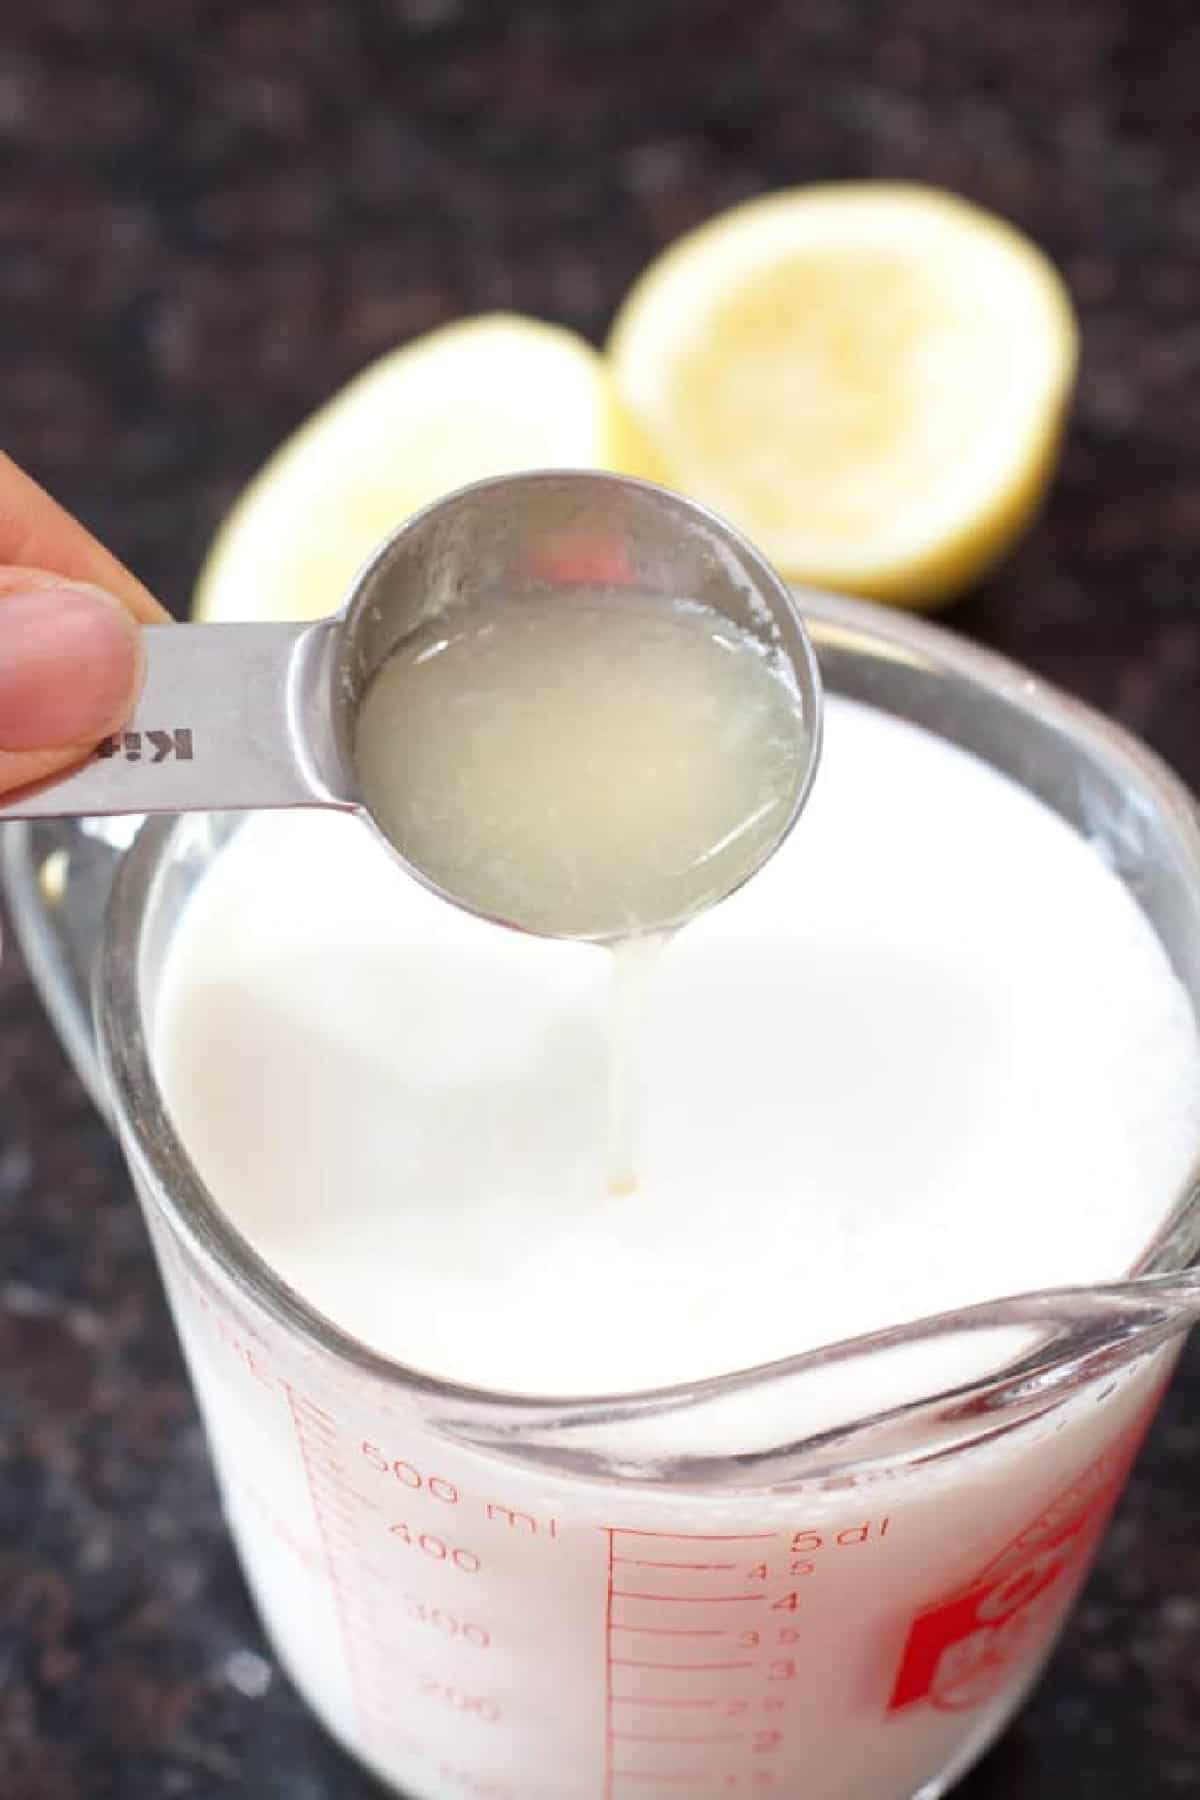 a tablespoon of lemon juice being poured into milk.